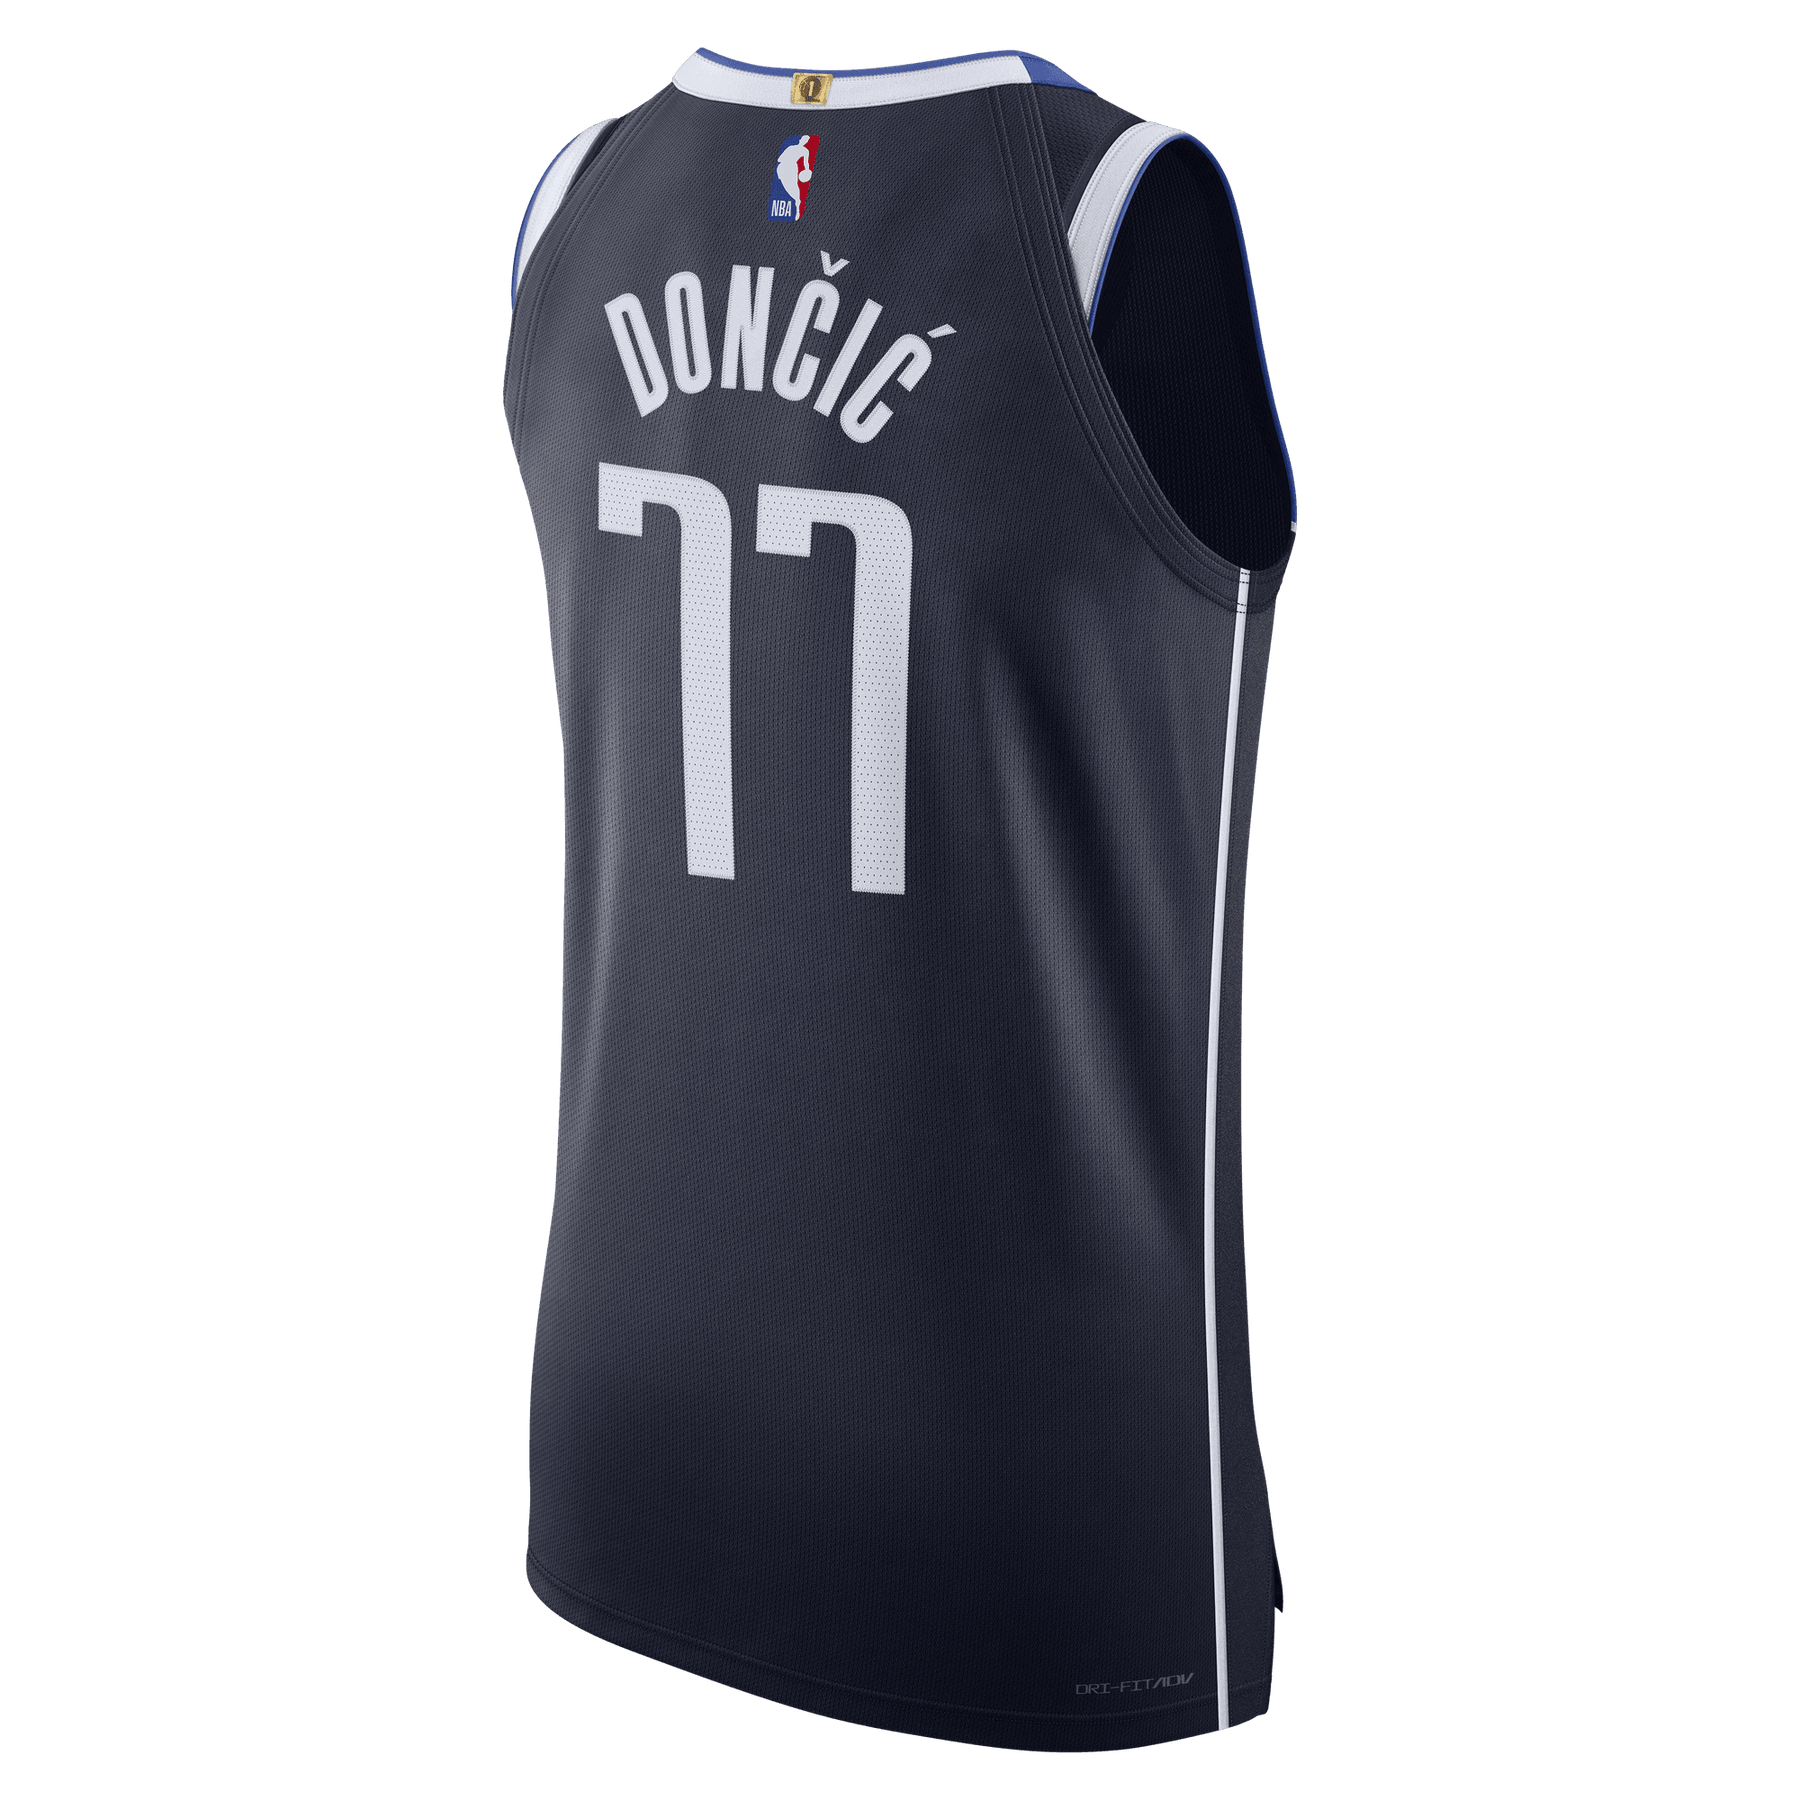 Authentic Jerseys On Sale Now!